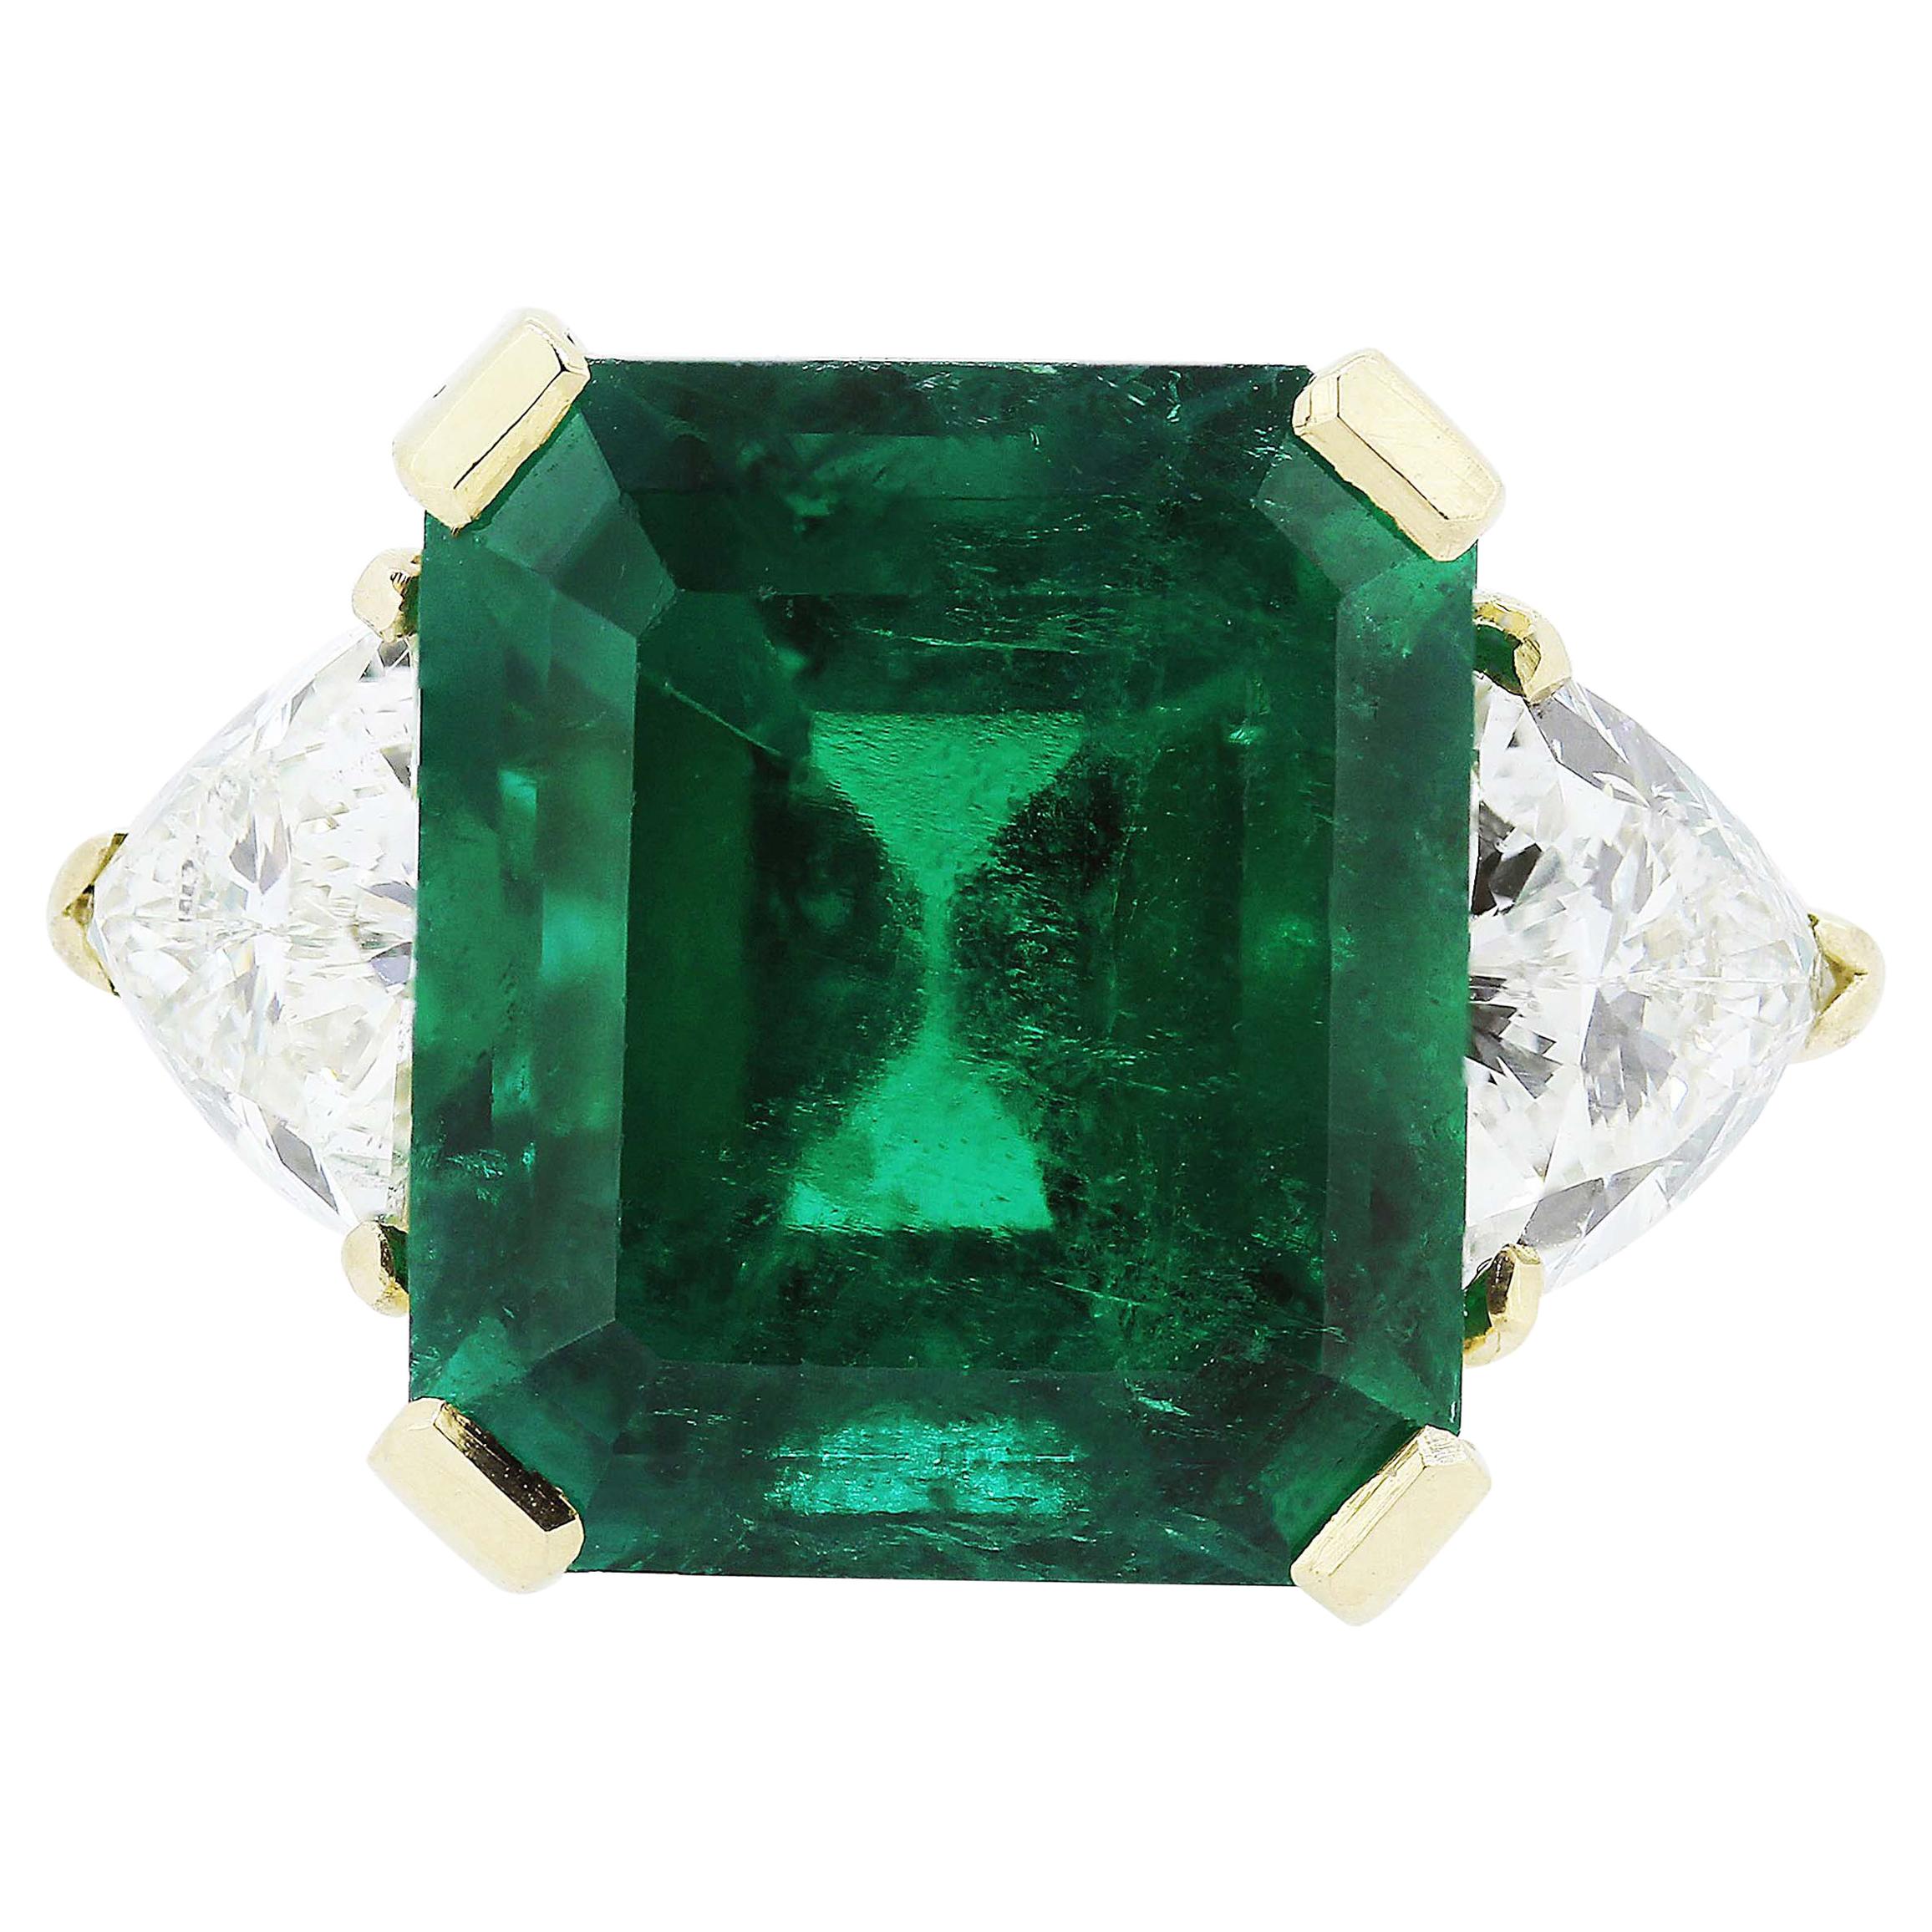 Certified Colombian Emerald 7.75ct & Diamonds 3-Stone Ring in 18ct Gold, Vintage